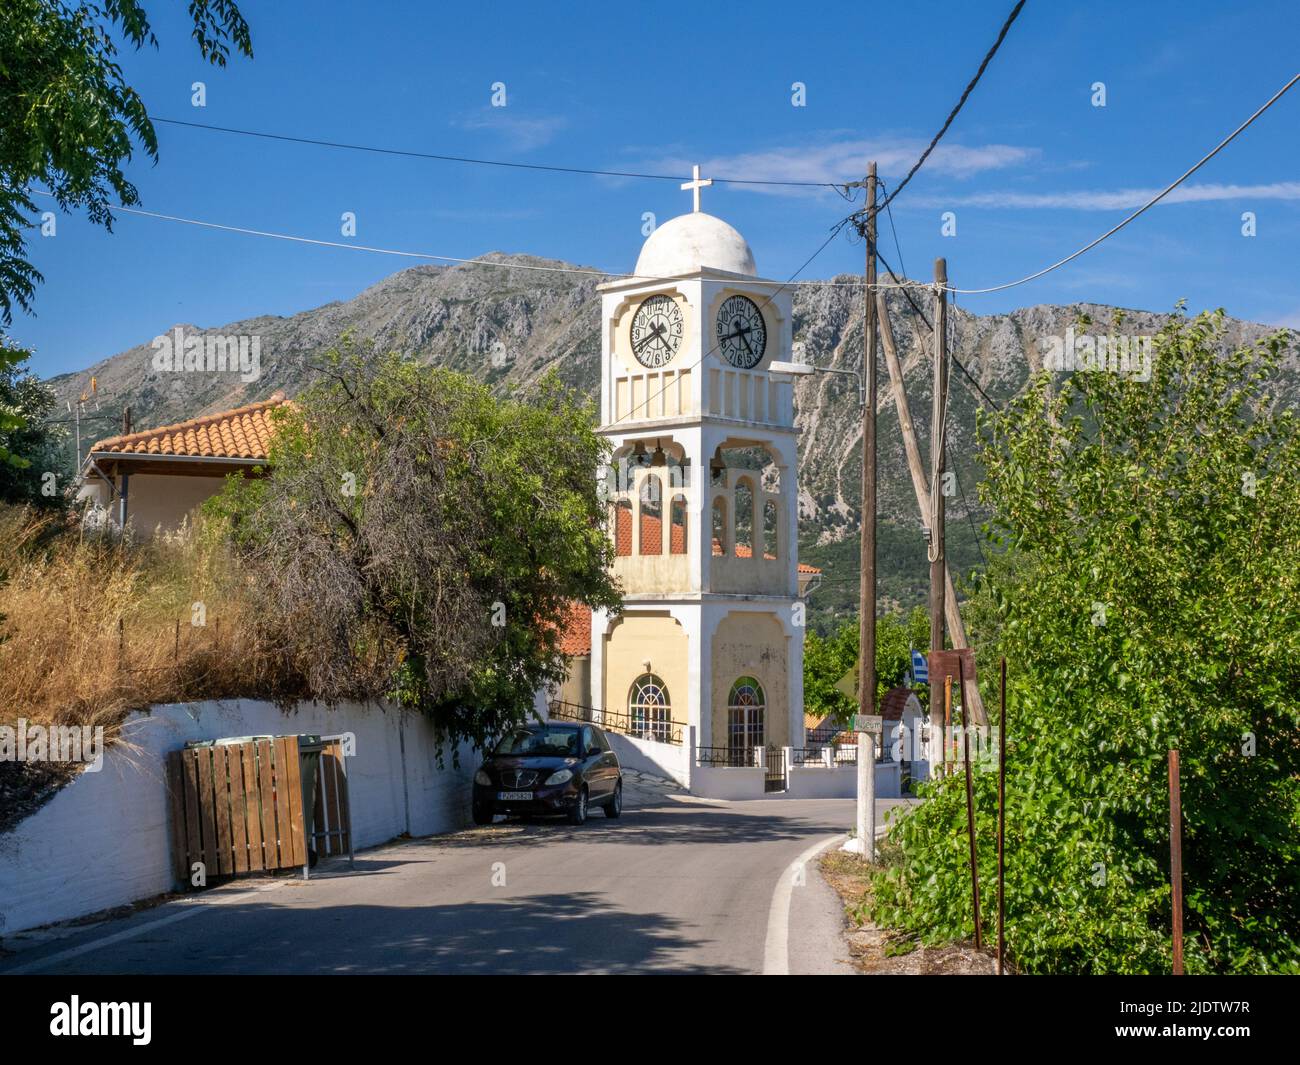 Bell tower and clock of orthodox church in the mountain village of Agios Petros (St Peter) on the Ionian Island of Lefkada Greece Stock Photo